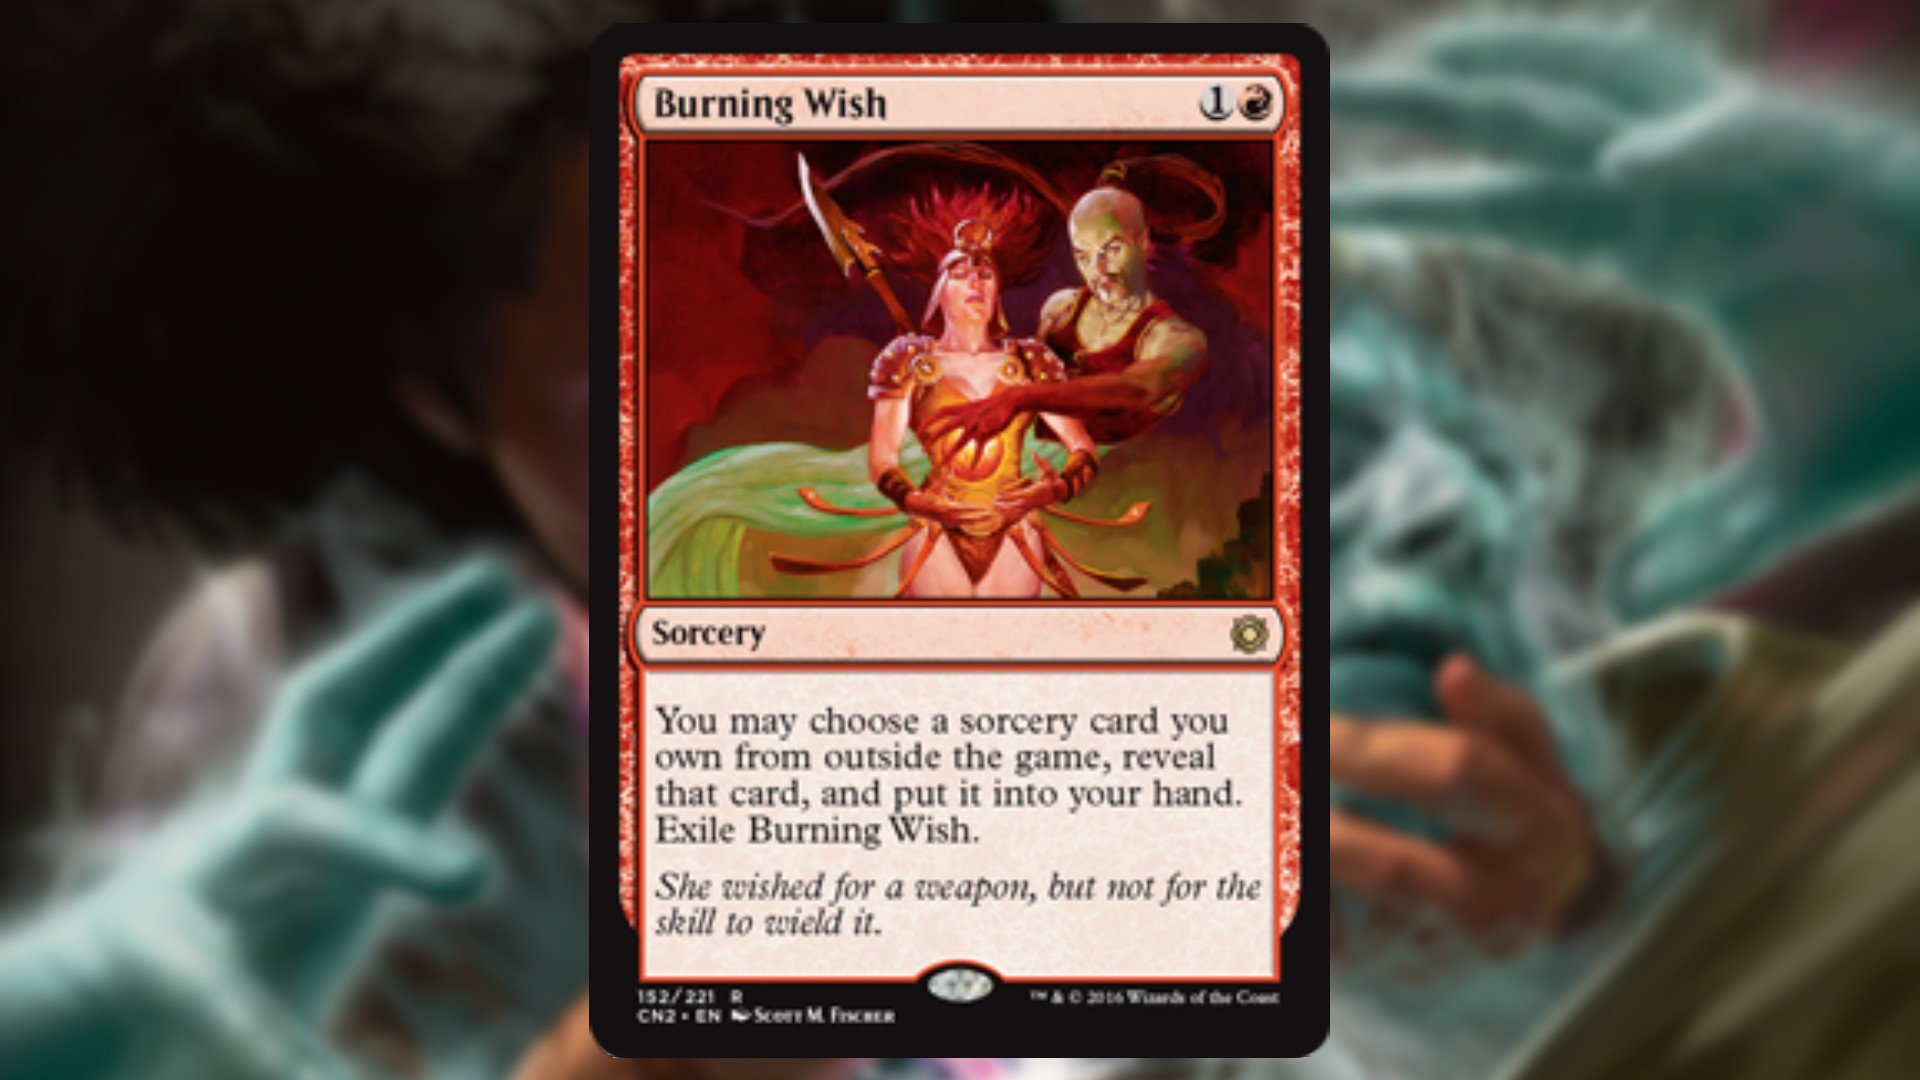 magic the gathering card in red with art of a strange figure holding a burning hand over the breast of another soldier 